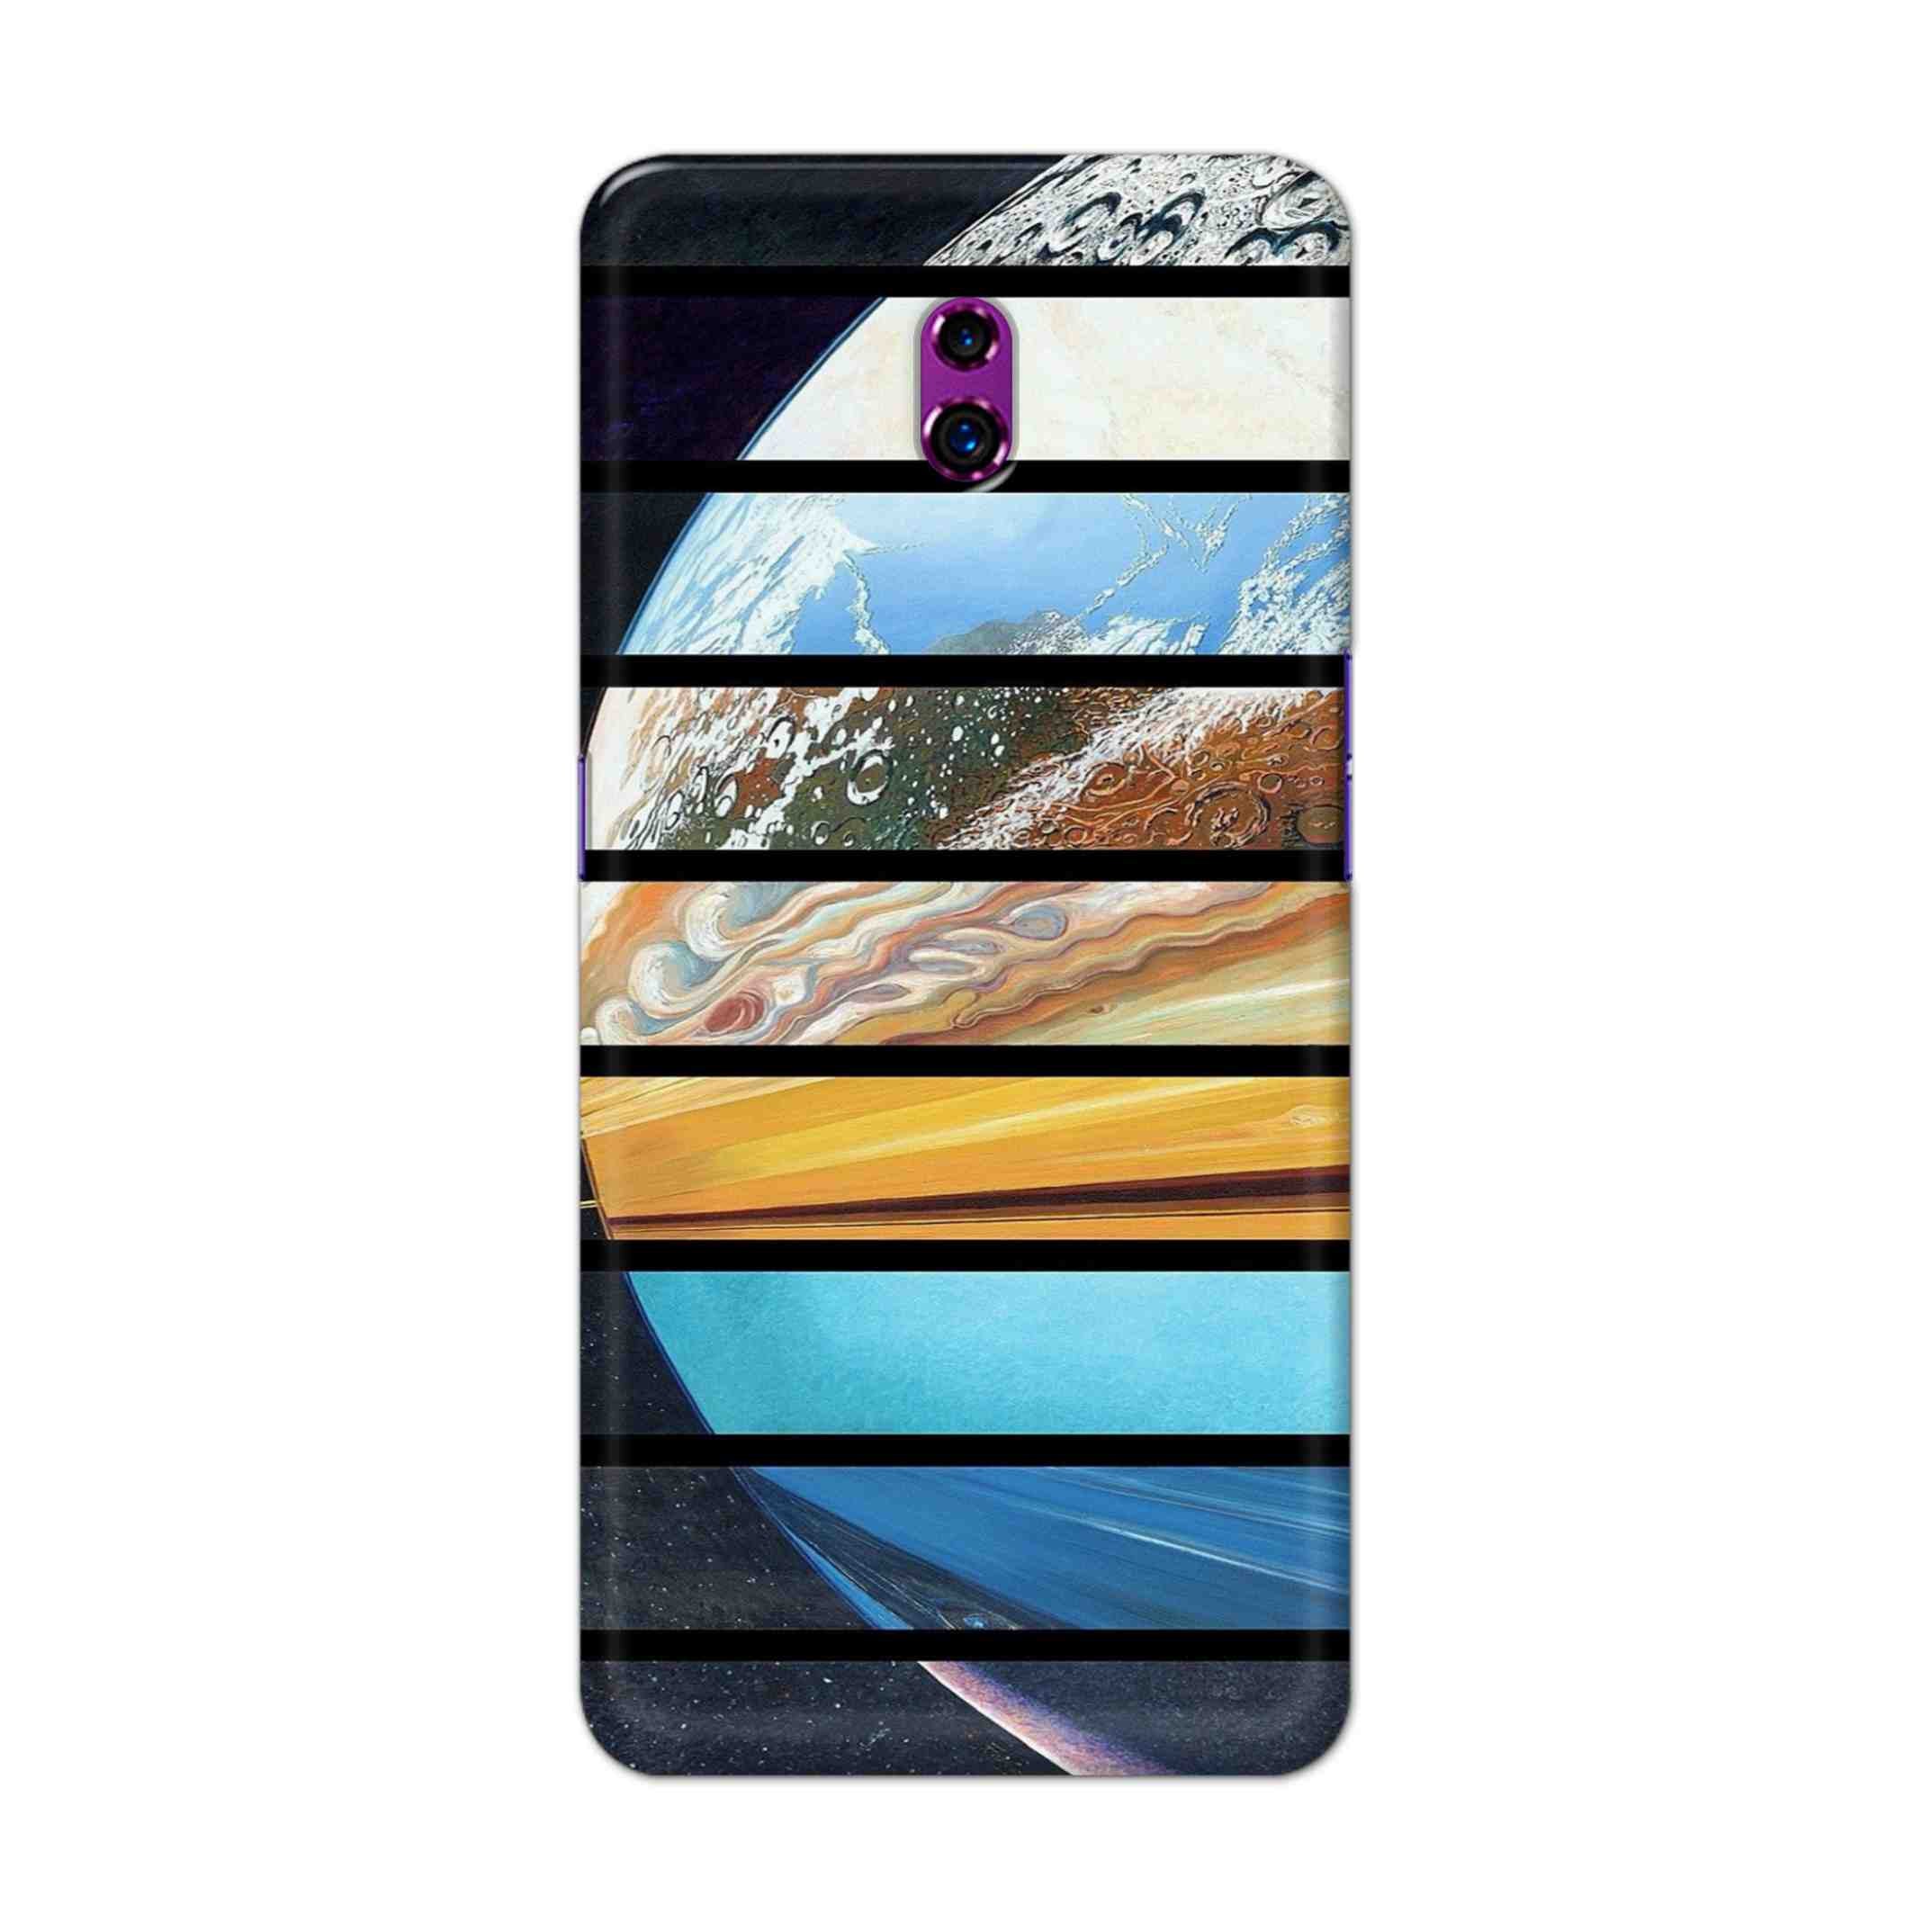 Buy Colourful Earth Hard Back Mobile Phone Case Cover For Oppo Reno Online